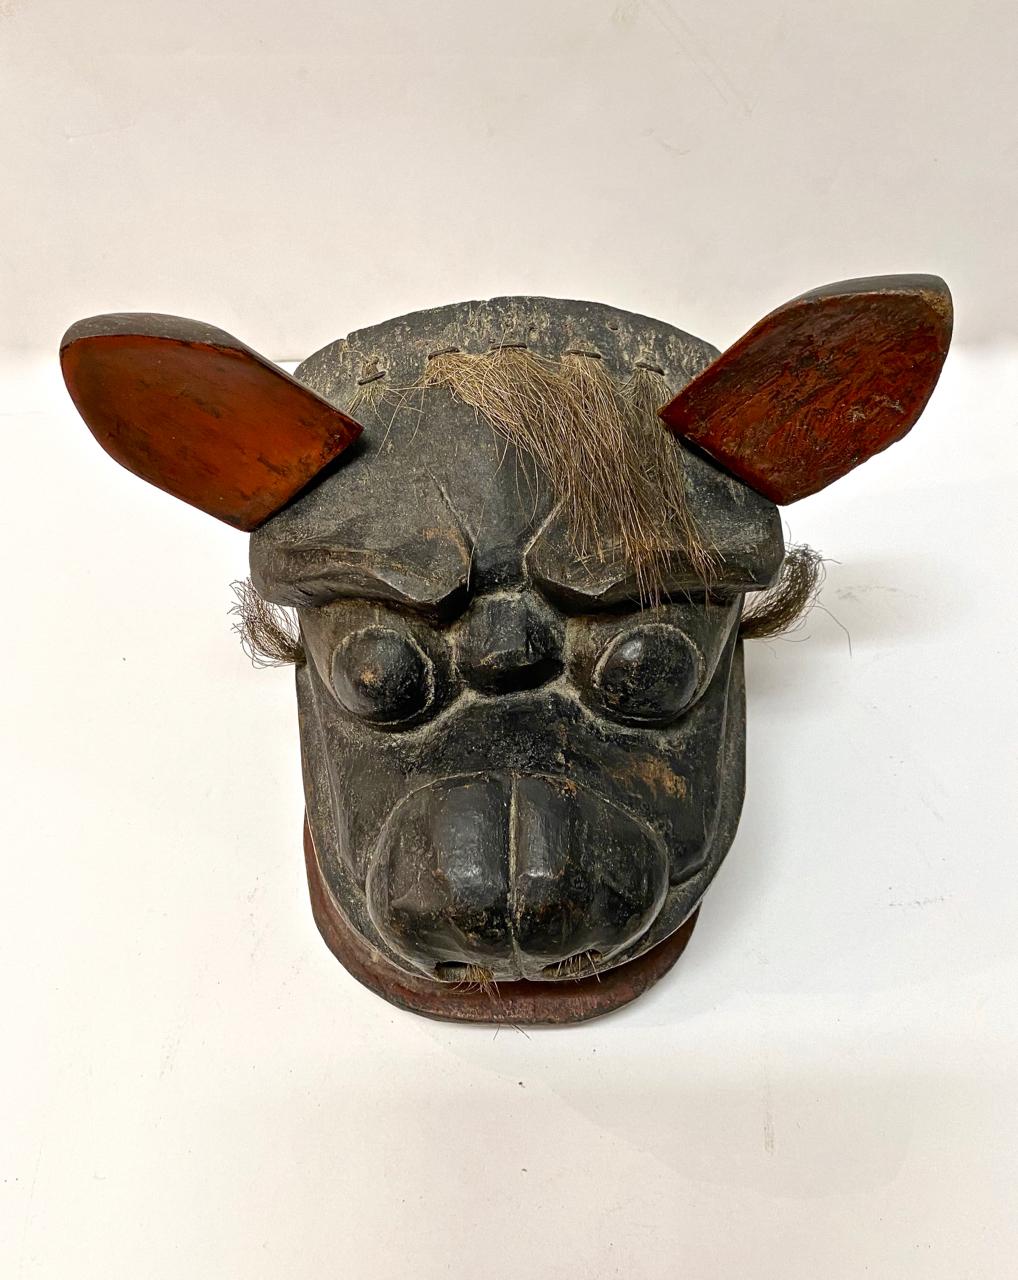 This another superb example of an Edo Period early 18th century or earlier Lion Mask created for the Lion Dances of the Gion Matsuri Festival. The mask is in overall good condition for its age and use. One ear is a replacement; the other ear is old,